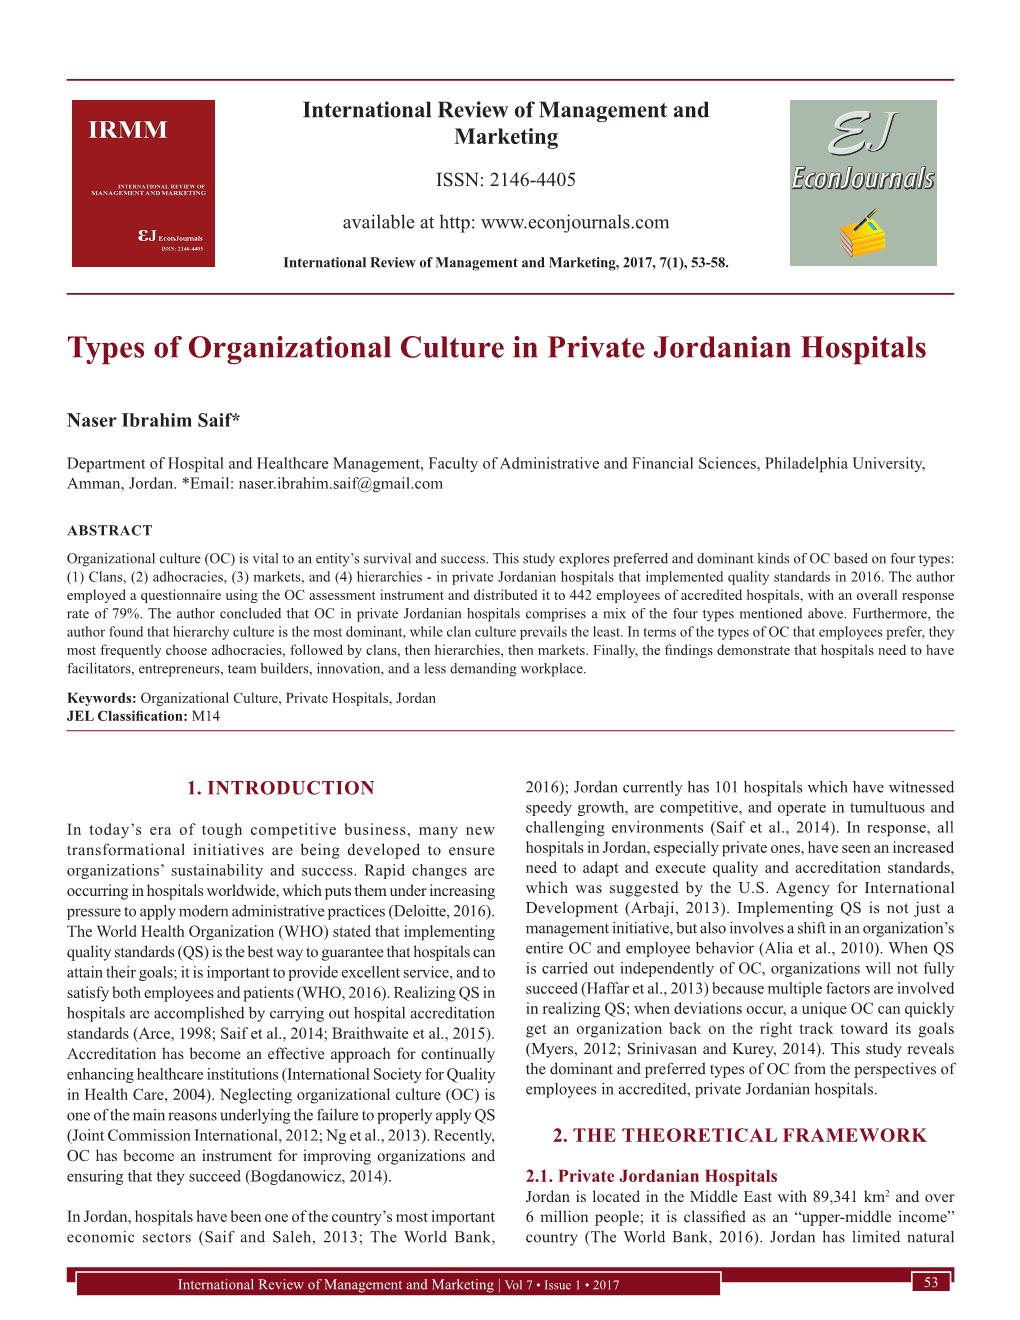 Types of Organizational Culture in Private Jordanian Hospitals